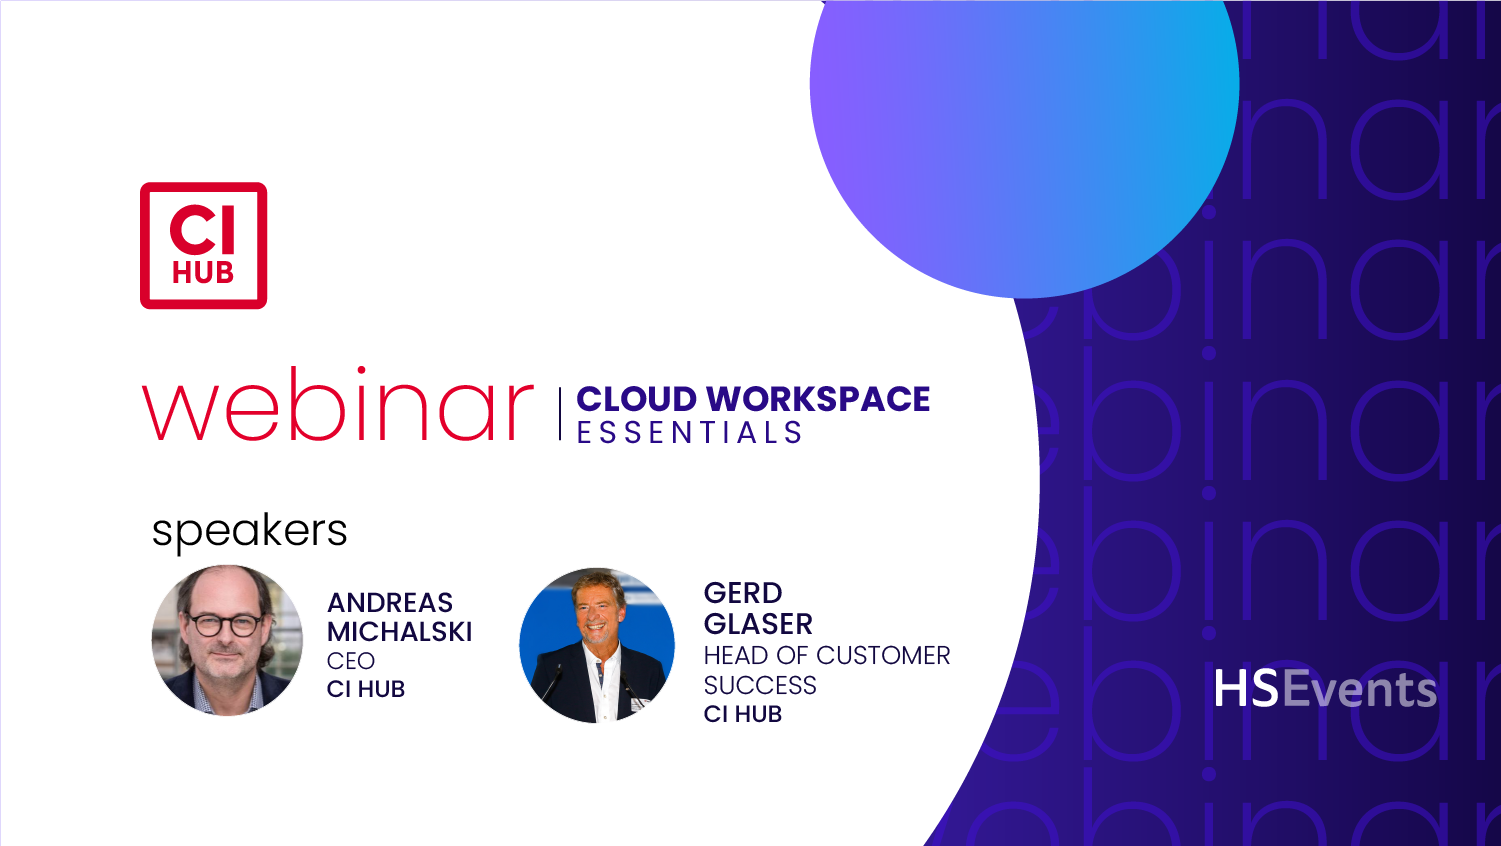 Join us on the “Cloud Workspace Essentials”...